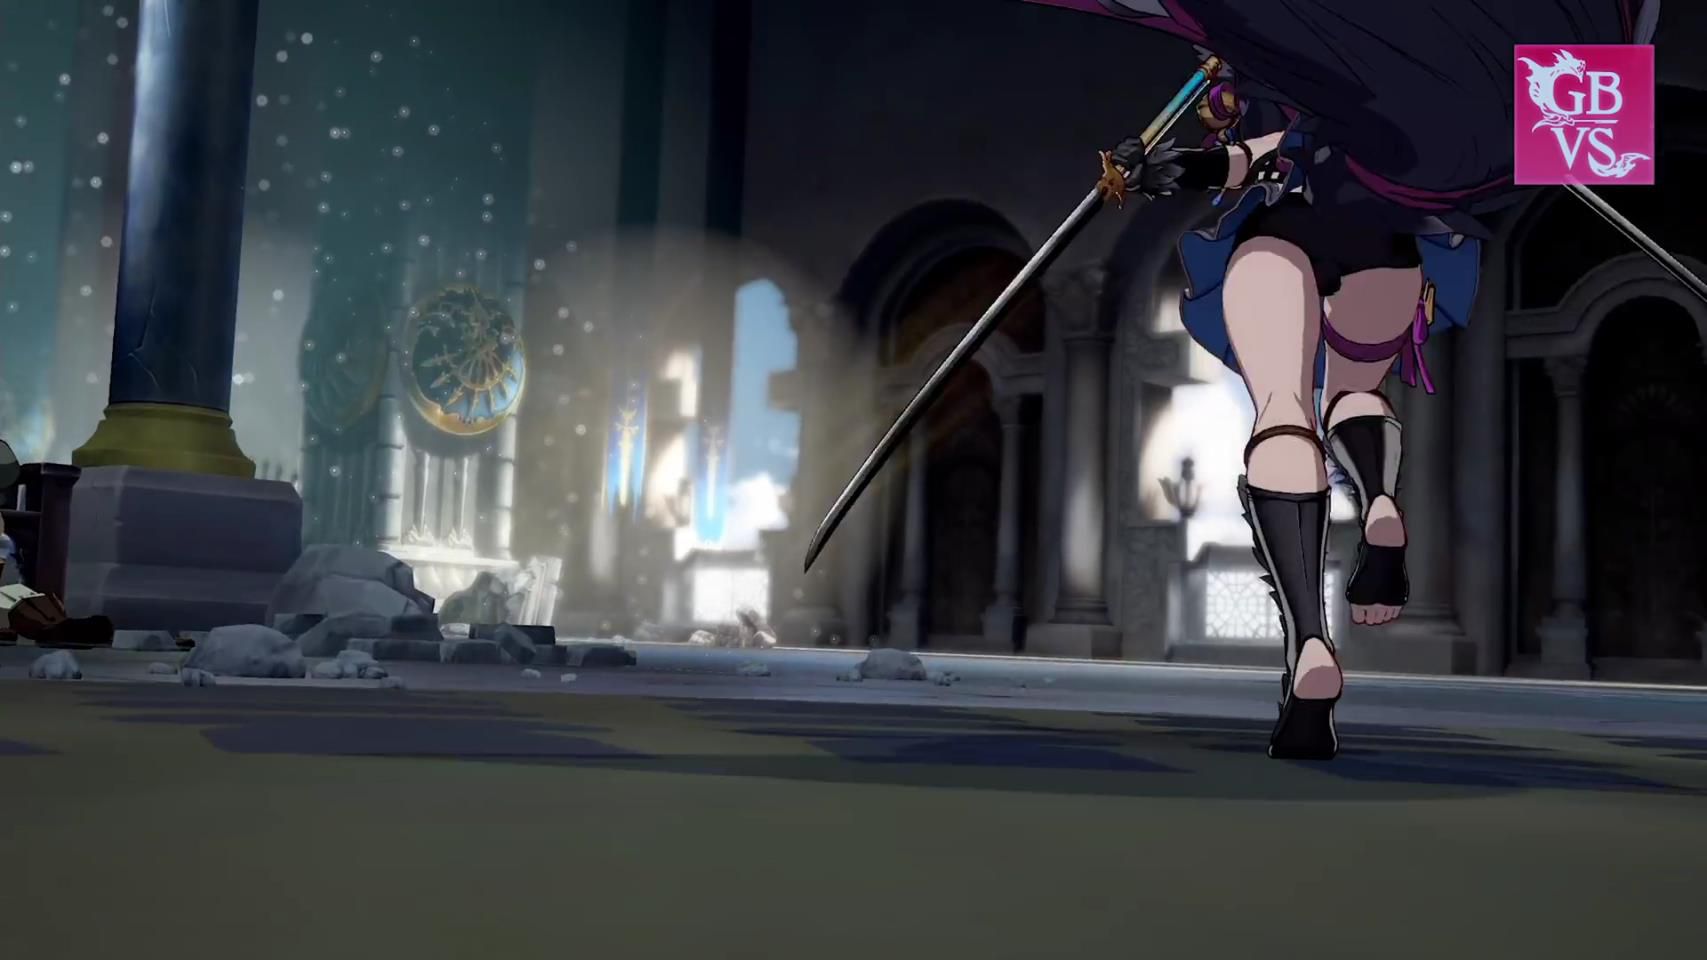 [Granblue Fantasy Versus] Erotic PV that Yuel's erotic spats become fully seen! 8